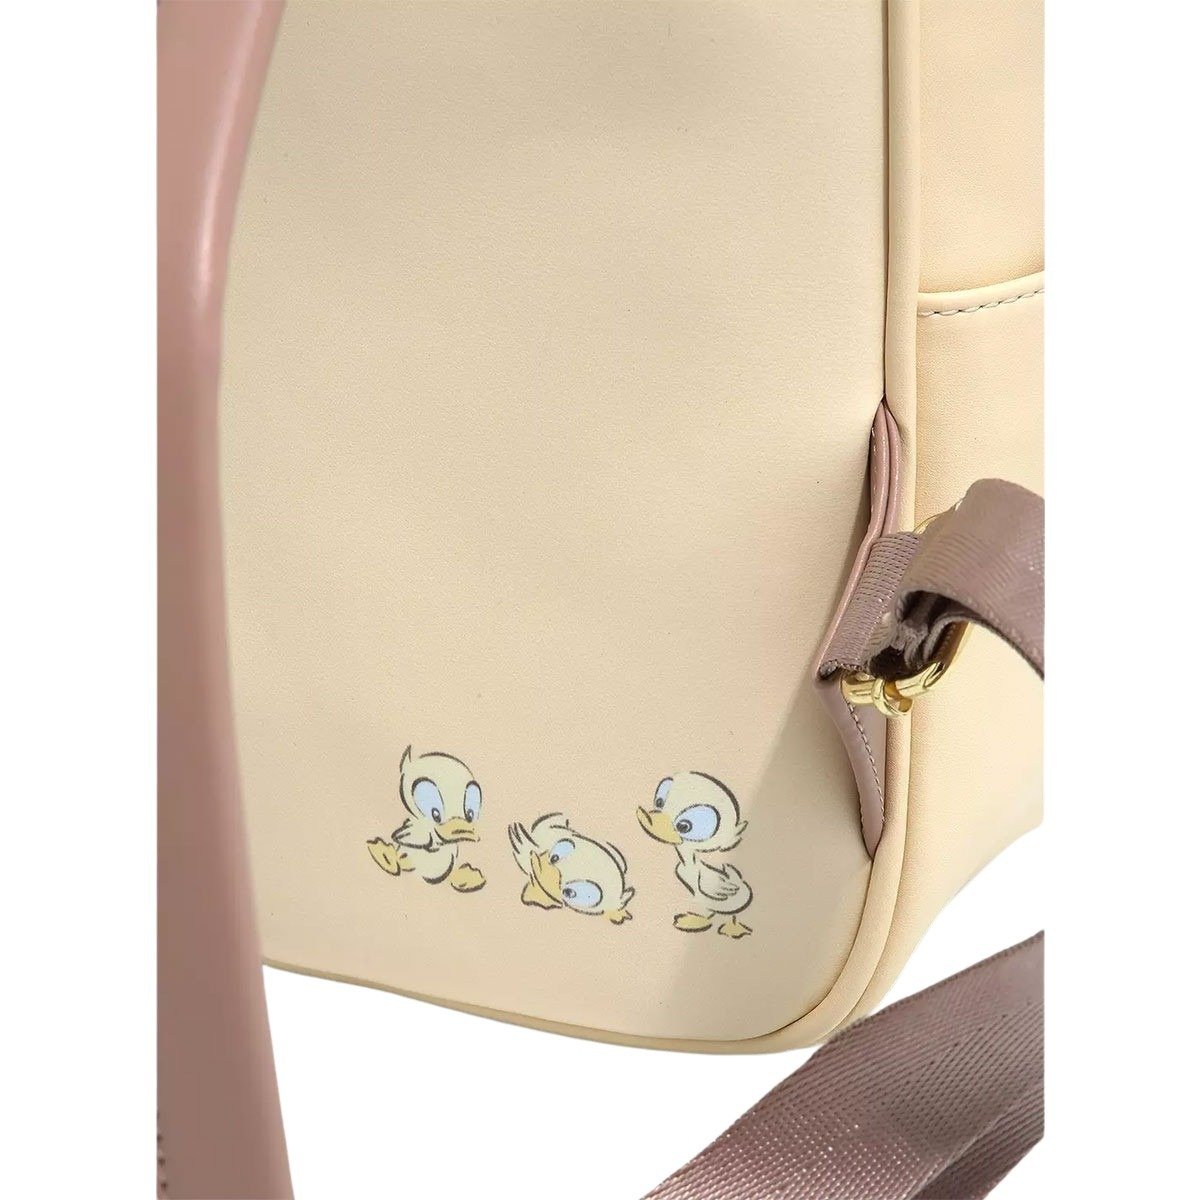 Back of the backpack: Adjustable straps and a small duckling print at the bottom.